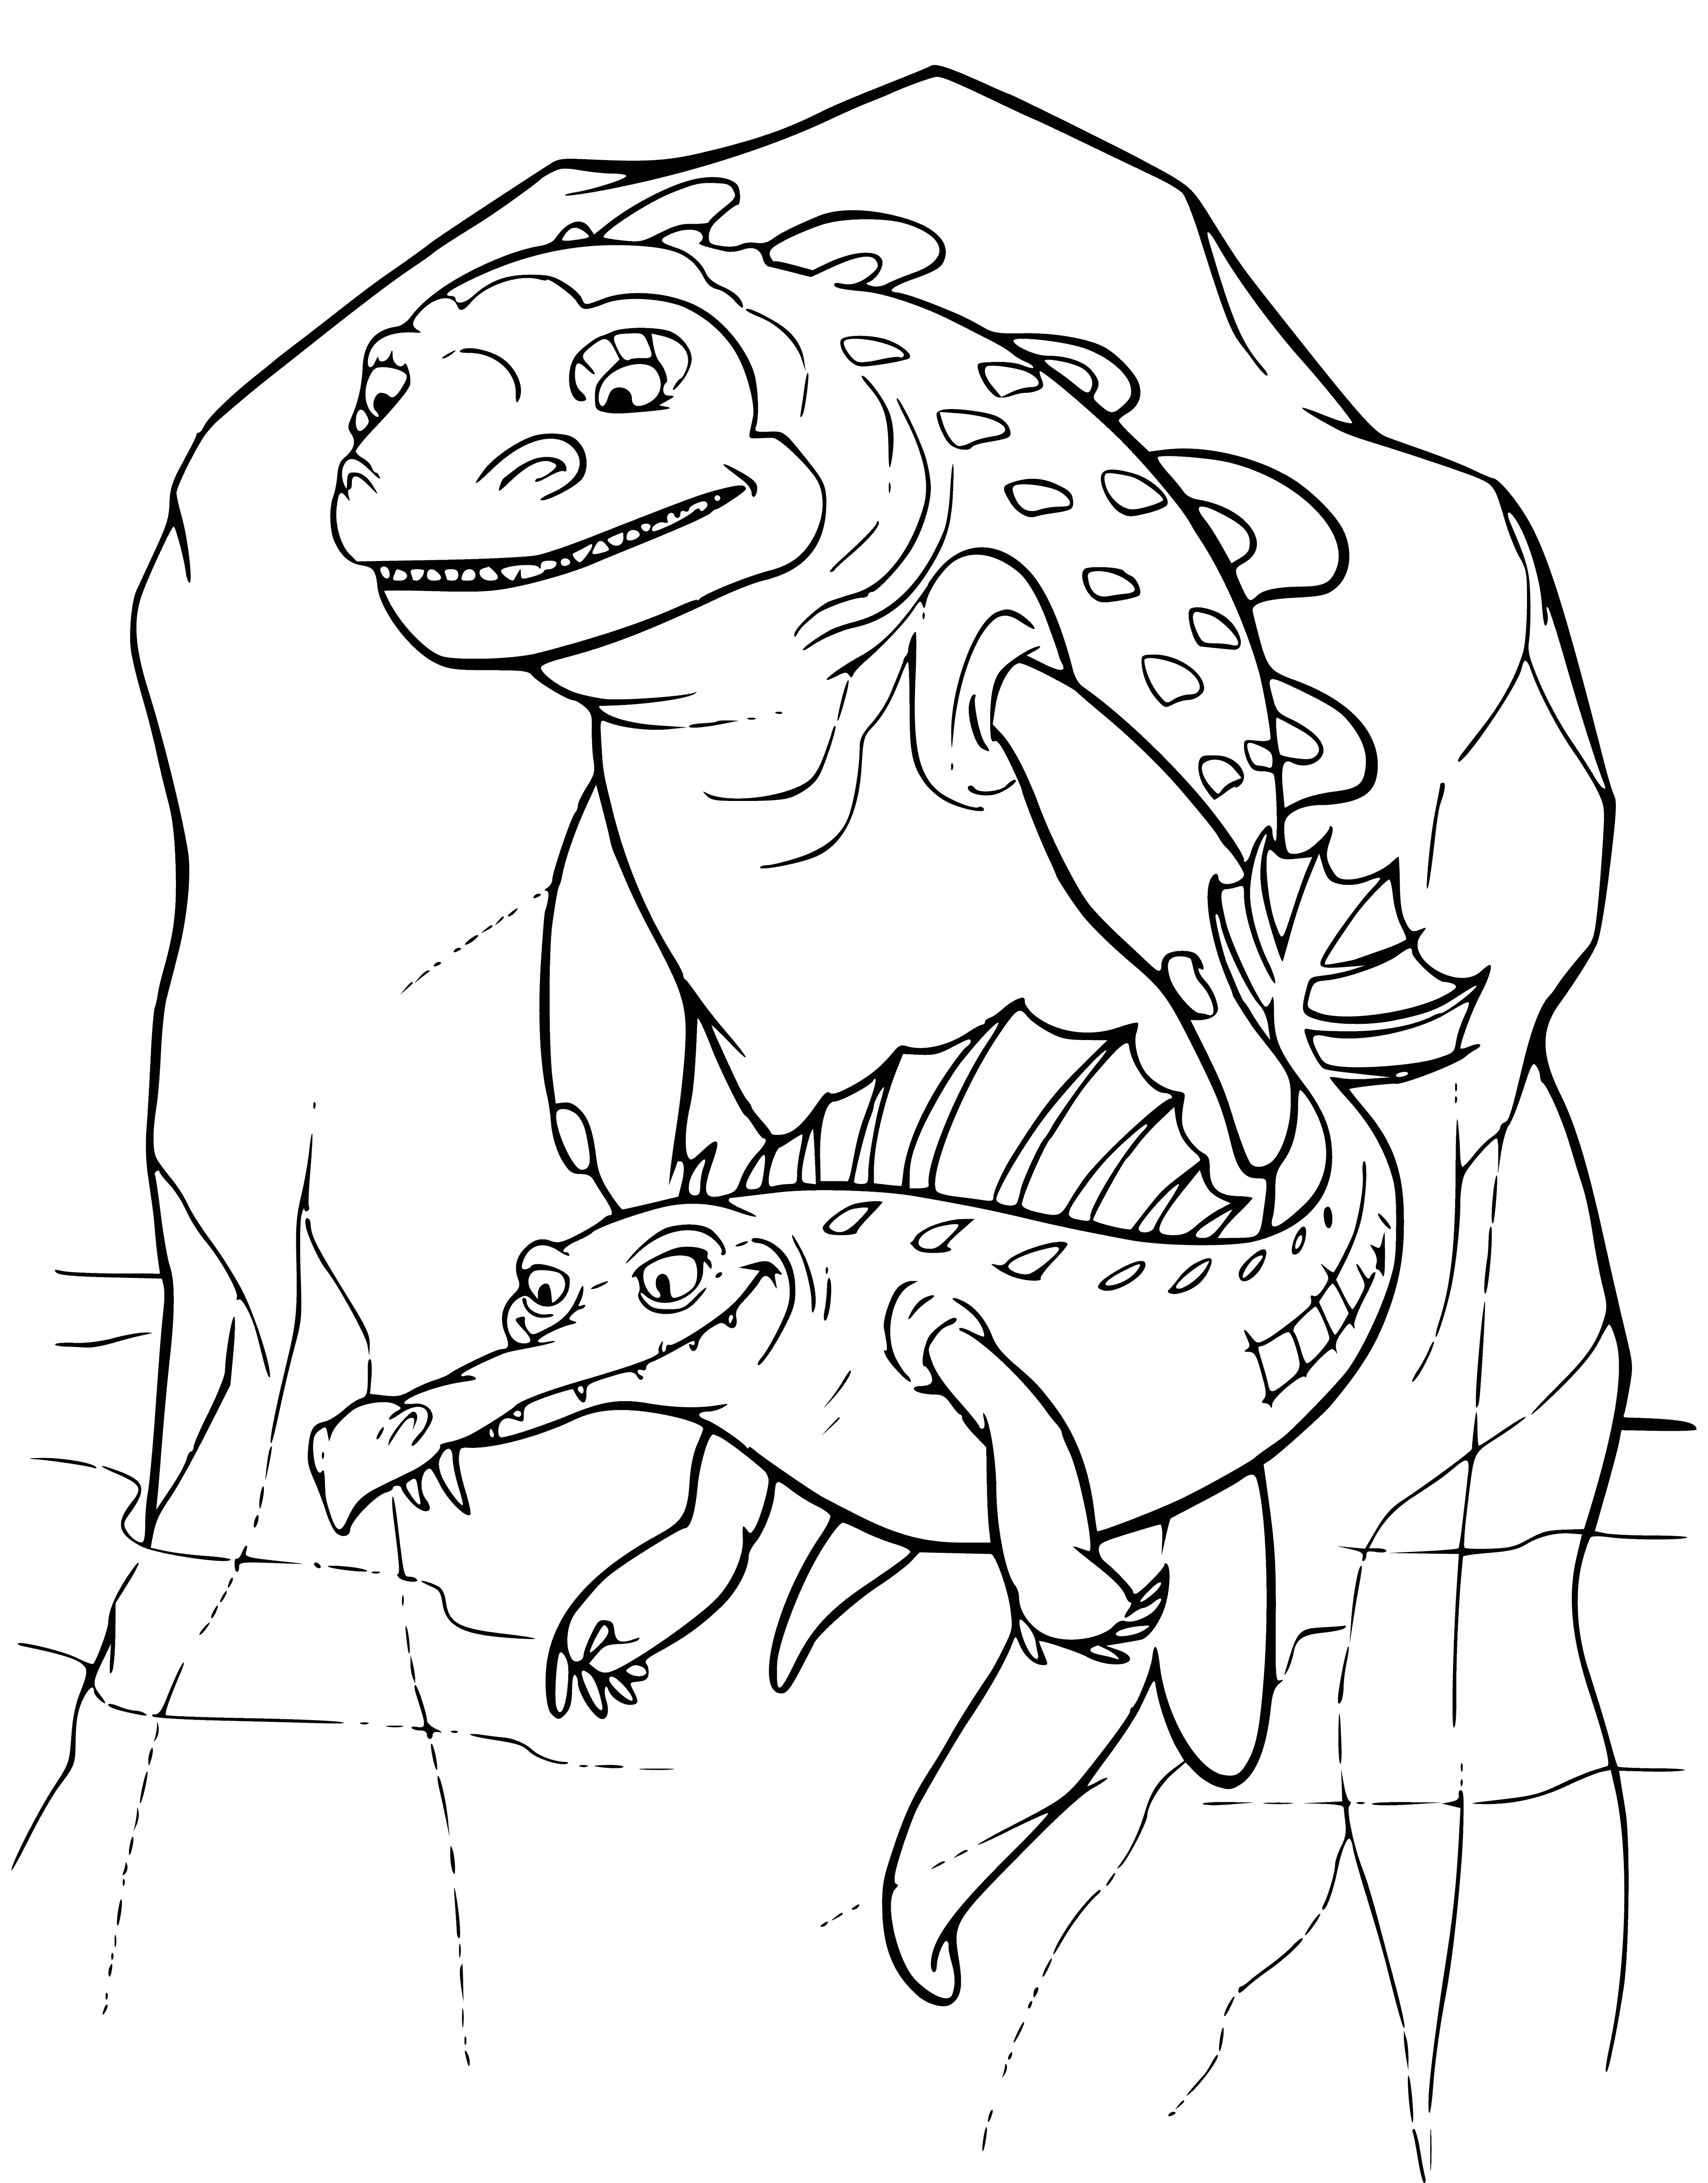 Reptiles in ice coloring page